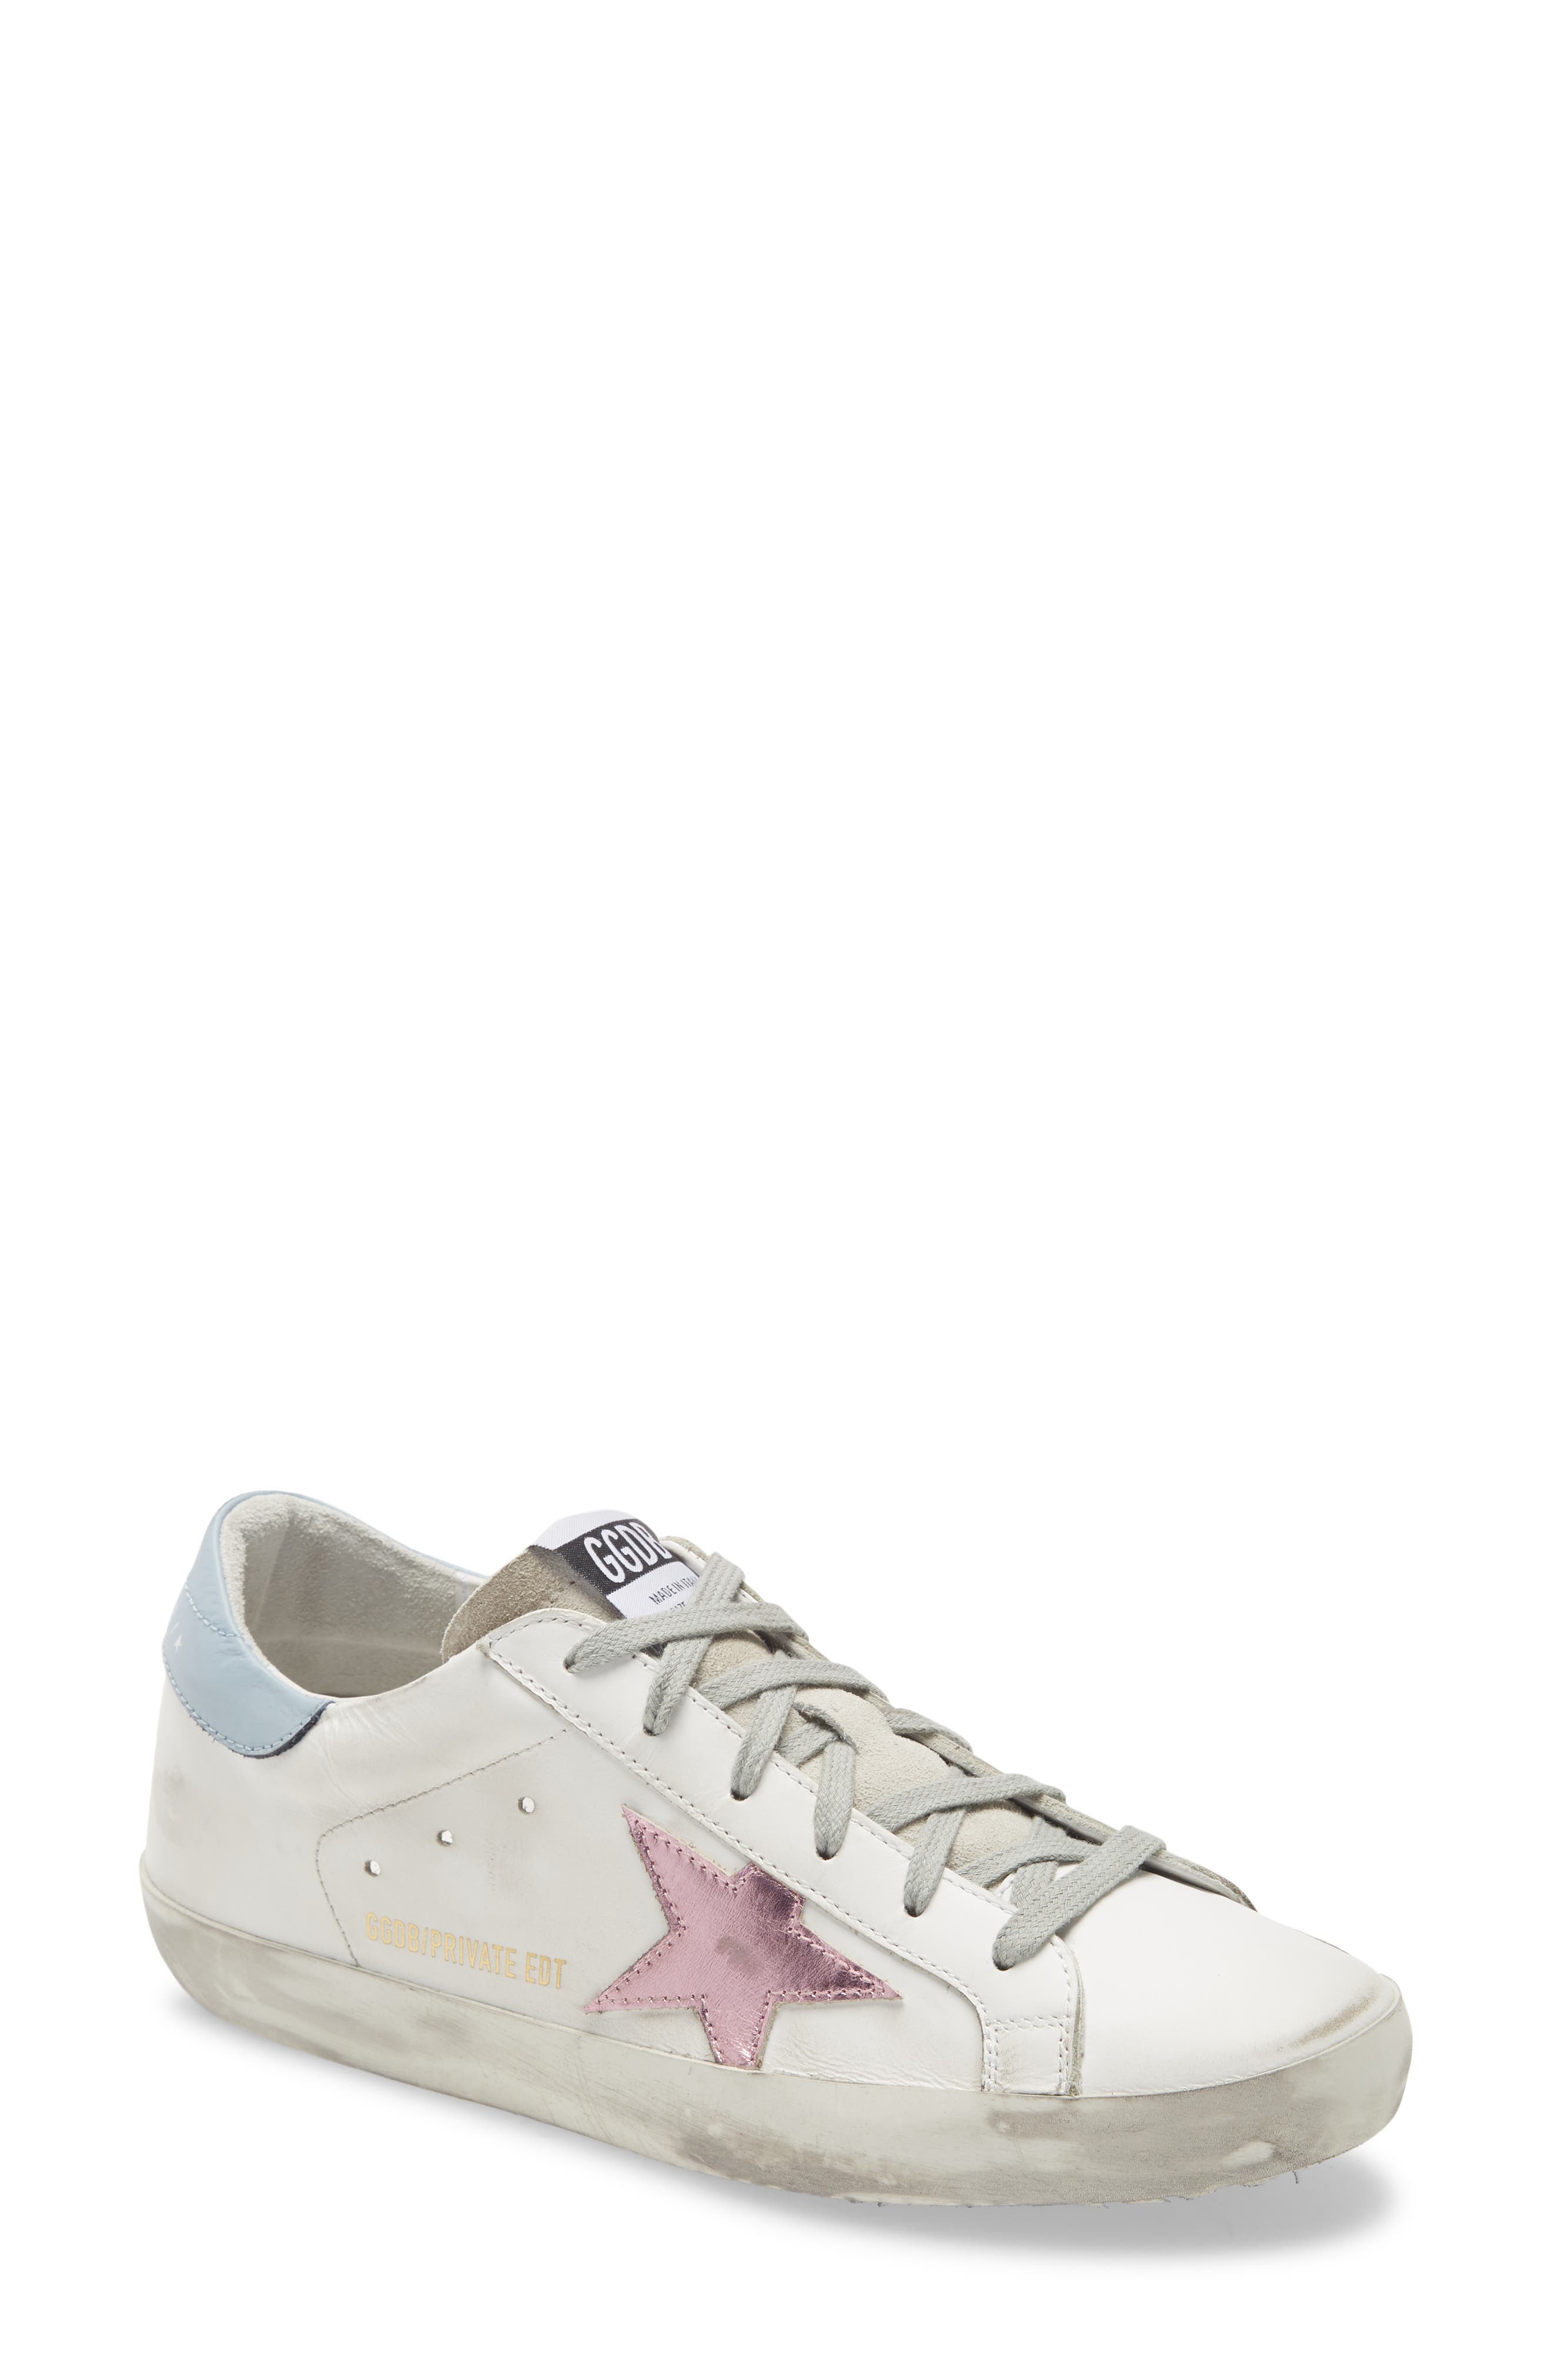 Buy > golden goose sizes to us > in stock